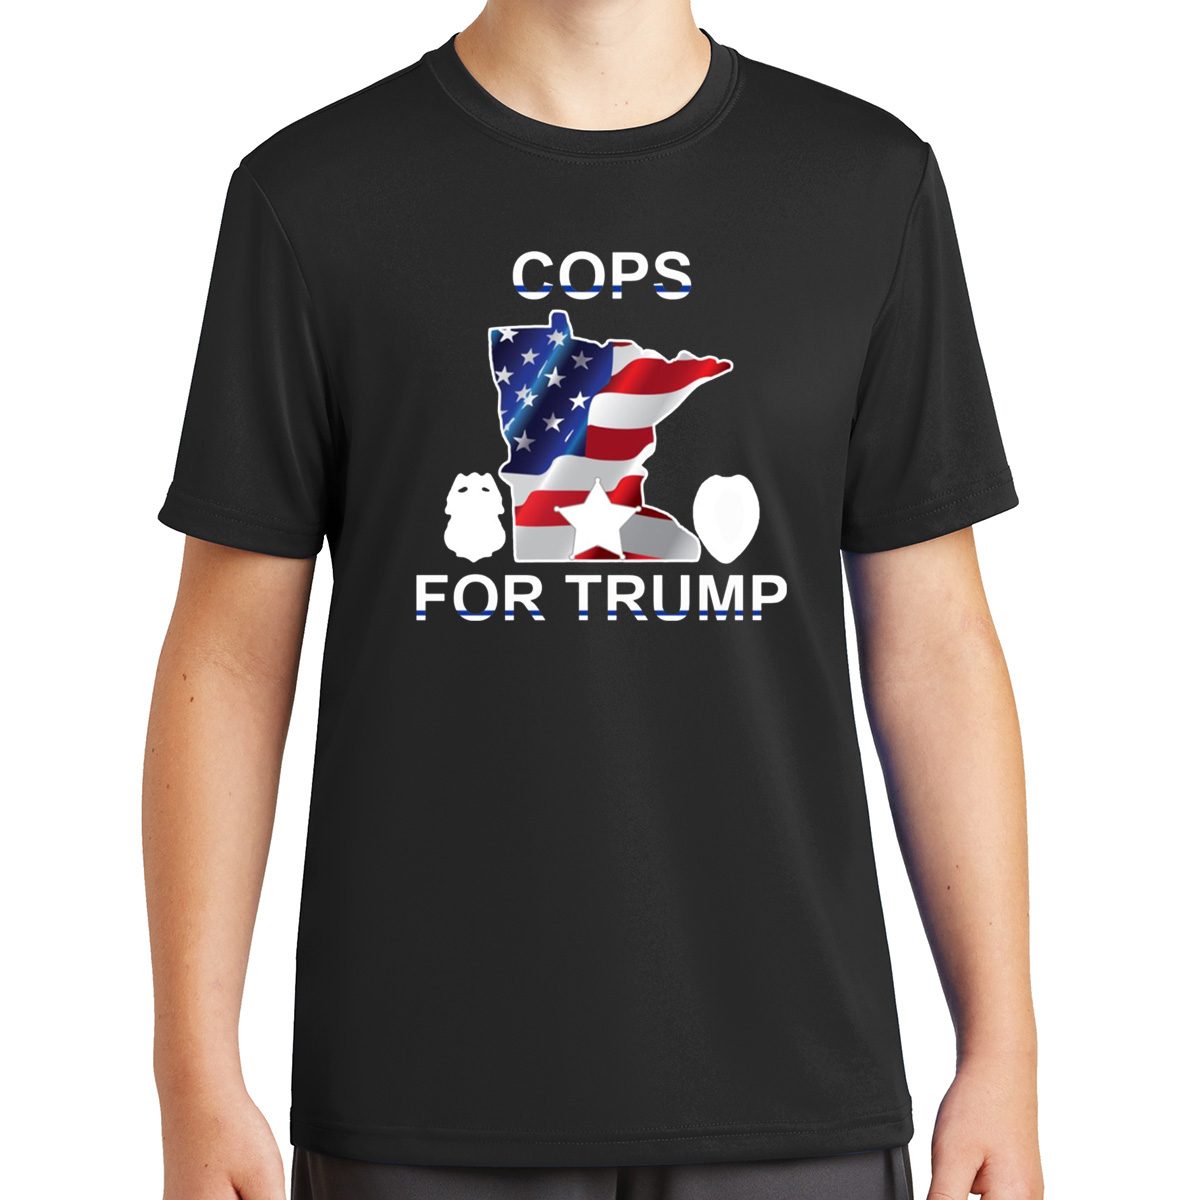 Where to buy 'Cops for Trump' T-Shirt Where to buy 'Cops for Trump'